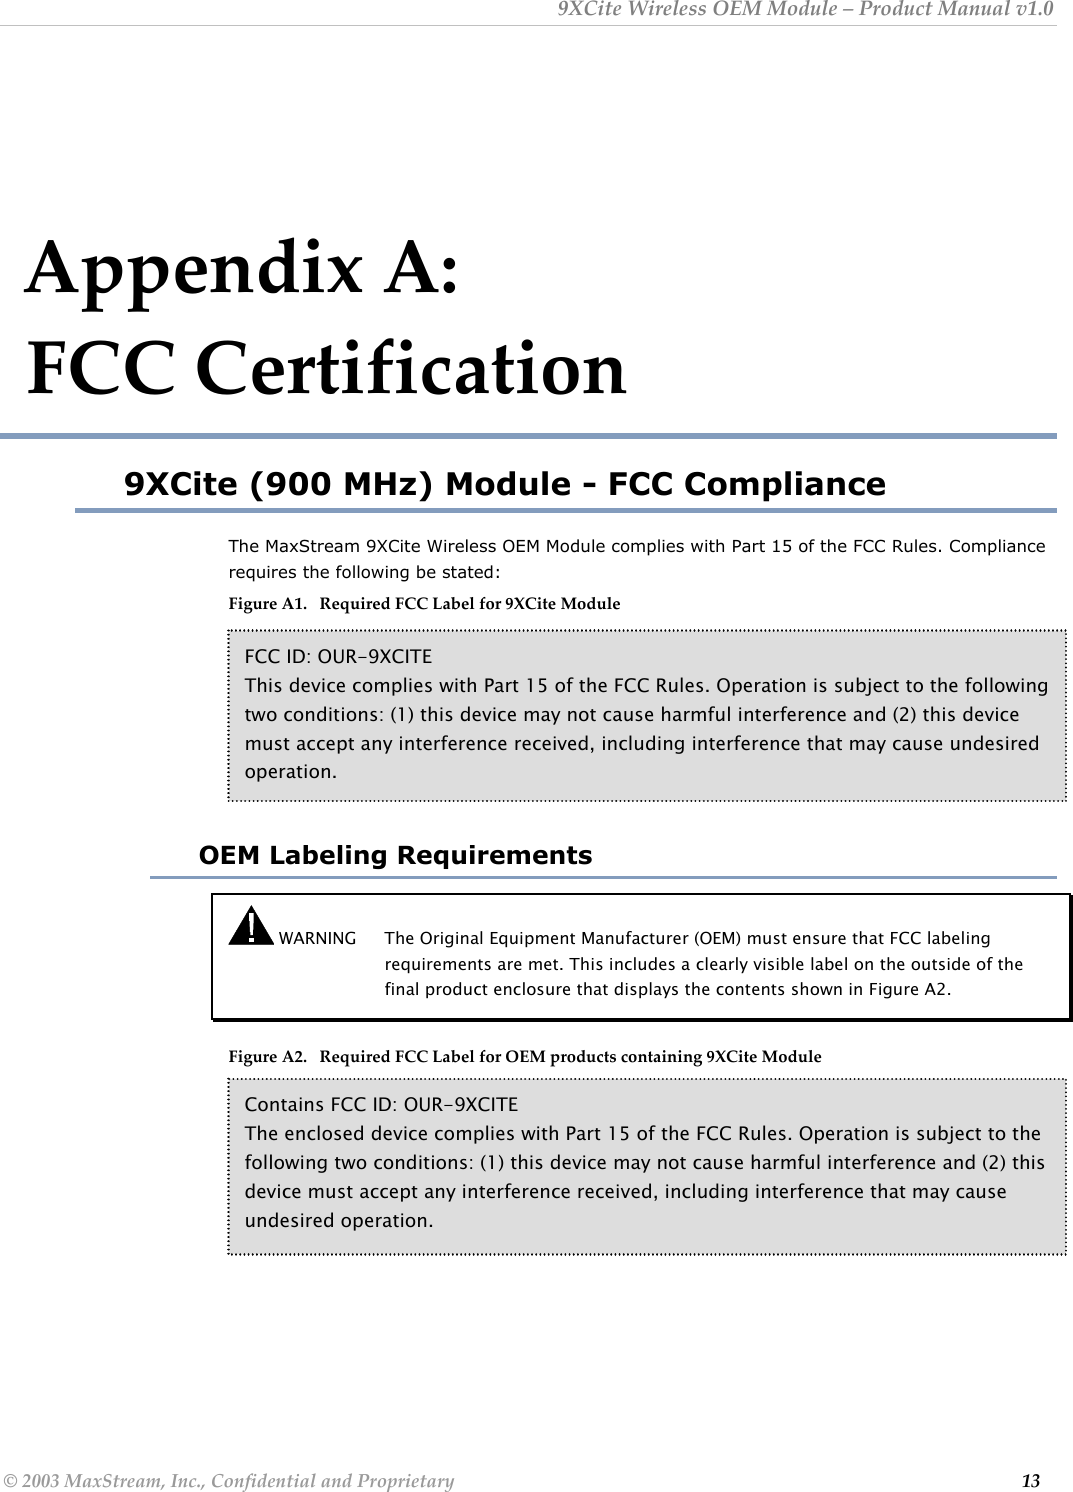 9XCite Wireless OEM Module – Product Manual v1.0  Appendix A:                        FCC Certification 9XCite (900 MHz) Module - FCC Compliance The MaxStream 9XCite Wireless OEM Module complies with Part 15 of the FCC Rules. Compliance requires the following be stated: Figure A1.   Required FCC Label for 9XCite Module      FCC ID: OUR-9XCITE This device complies with Part 15 of the FCC Rules. Operation is subject to the following two conditions: (1) this device may not cause harmful interference and (2) this device must accept any interference received, including interference that may cause undesired operation.  OEM Labeling Requirements  WARNING  The Original Equipment Manufacturer (OEM) must ensure that FCC labeling requirements are met. This includes a clearly visible label on the outside of the final product enclosure that displays the contents shown in Figure A2.   Figure A2.   Required FCC Label for OEM products containing 9XCite Module          Contains FCC ID: OUR-9XCITE The enclosed device complies with Part 15 of the FCC Rules. Operation is subject to the following two conditions: (1) this device may not cause harmful interference and (2) this device must accept any interference received, including interference that may cause undesired operation. © 2003 MaxStream, Inc., Confidential and Proprietary                                                                                                                         13 